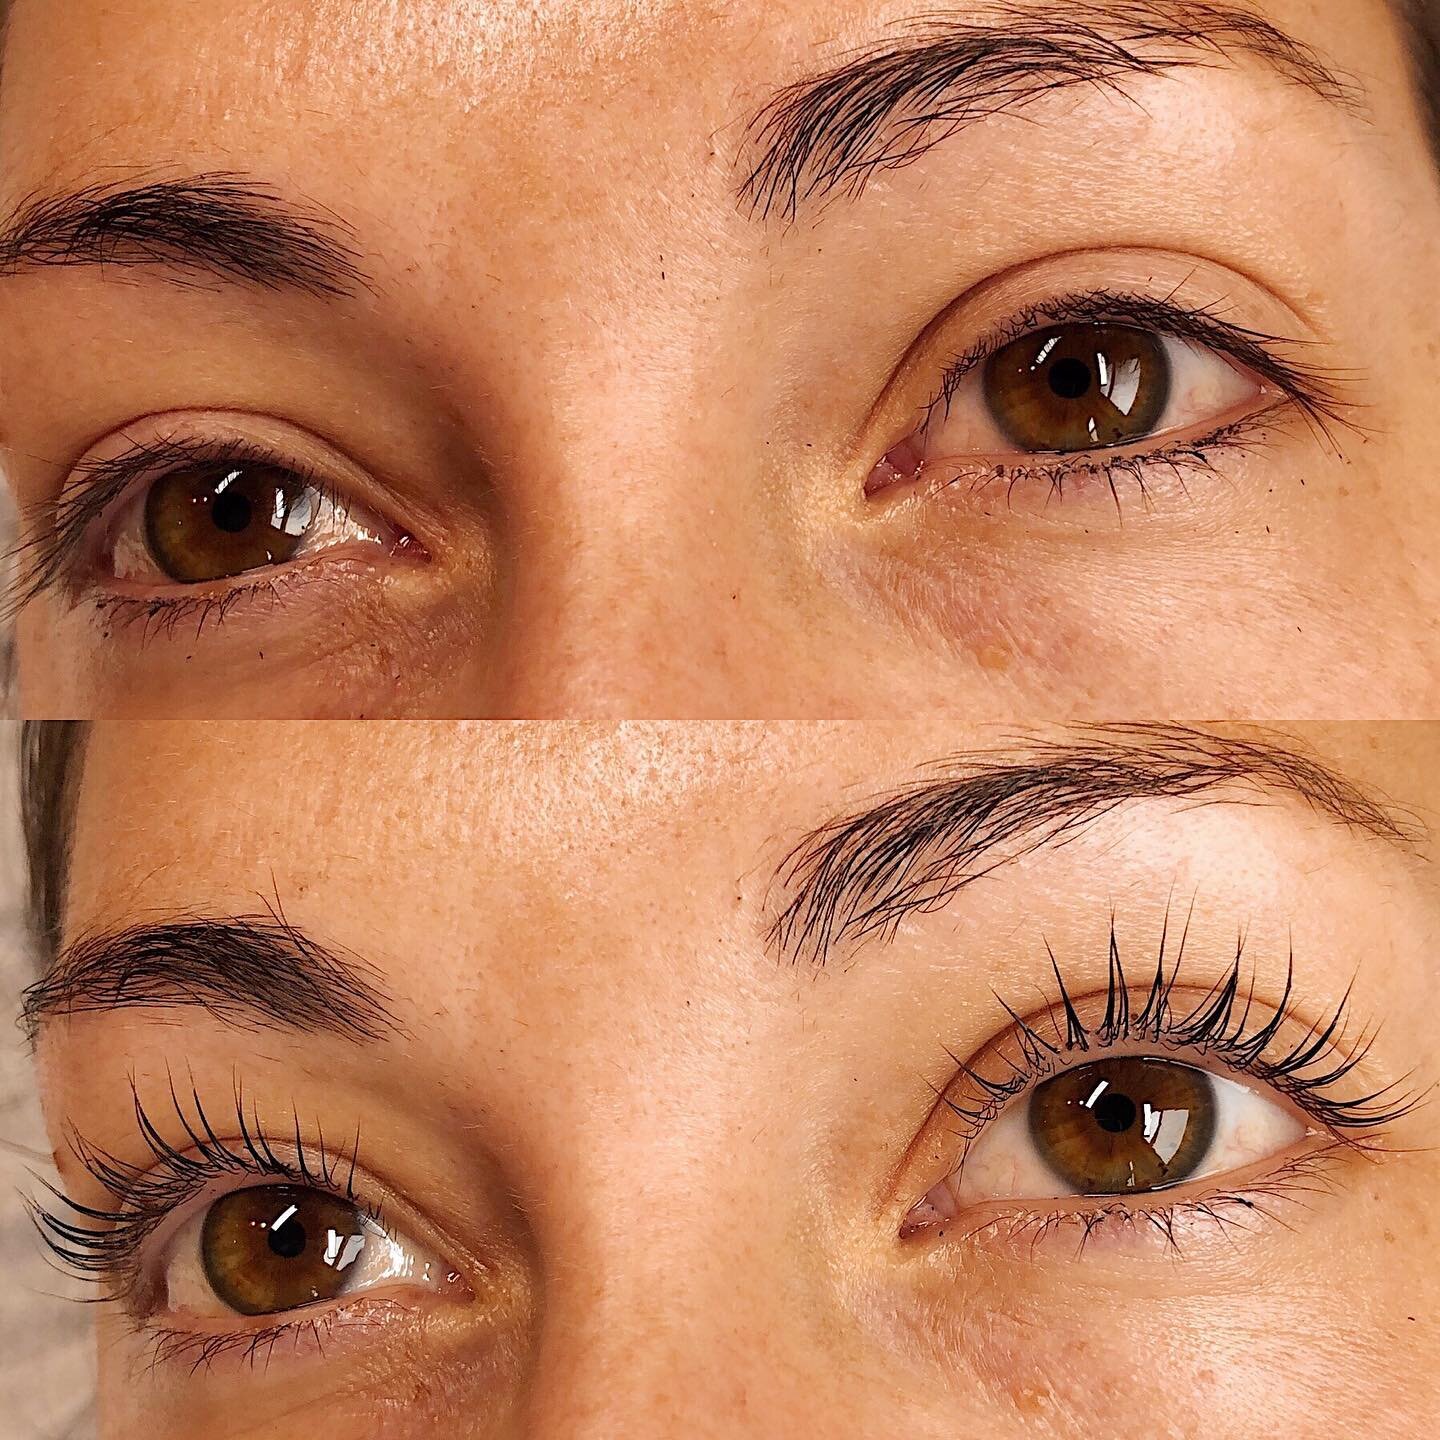 Can you BELIEVE these lashes were hiding in plain sight!? Discovered these natural lashes with the help of. @elleebana lash lift + tint. LR 7/5/5
.
#elleebanaambassador #elleebana #elleebanalashlift #lashlift #lashliftandtint #baltimorelashes #bestof